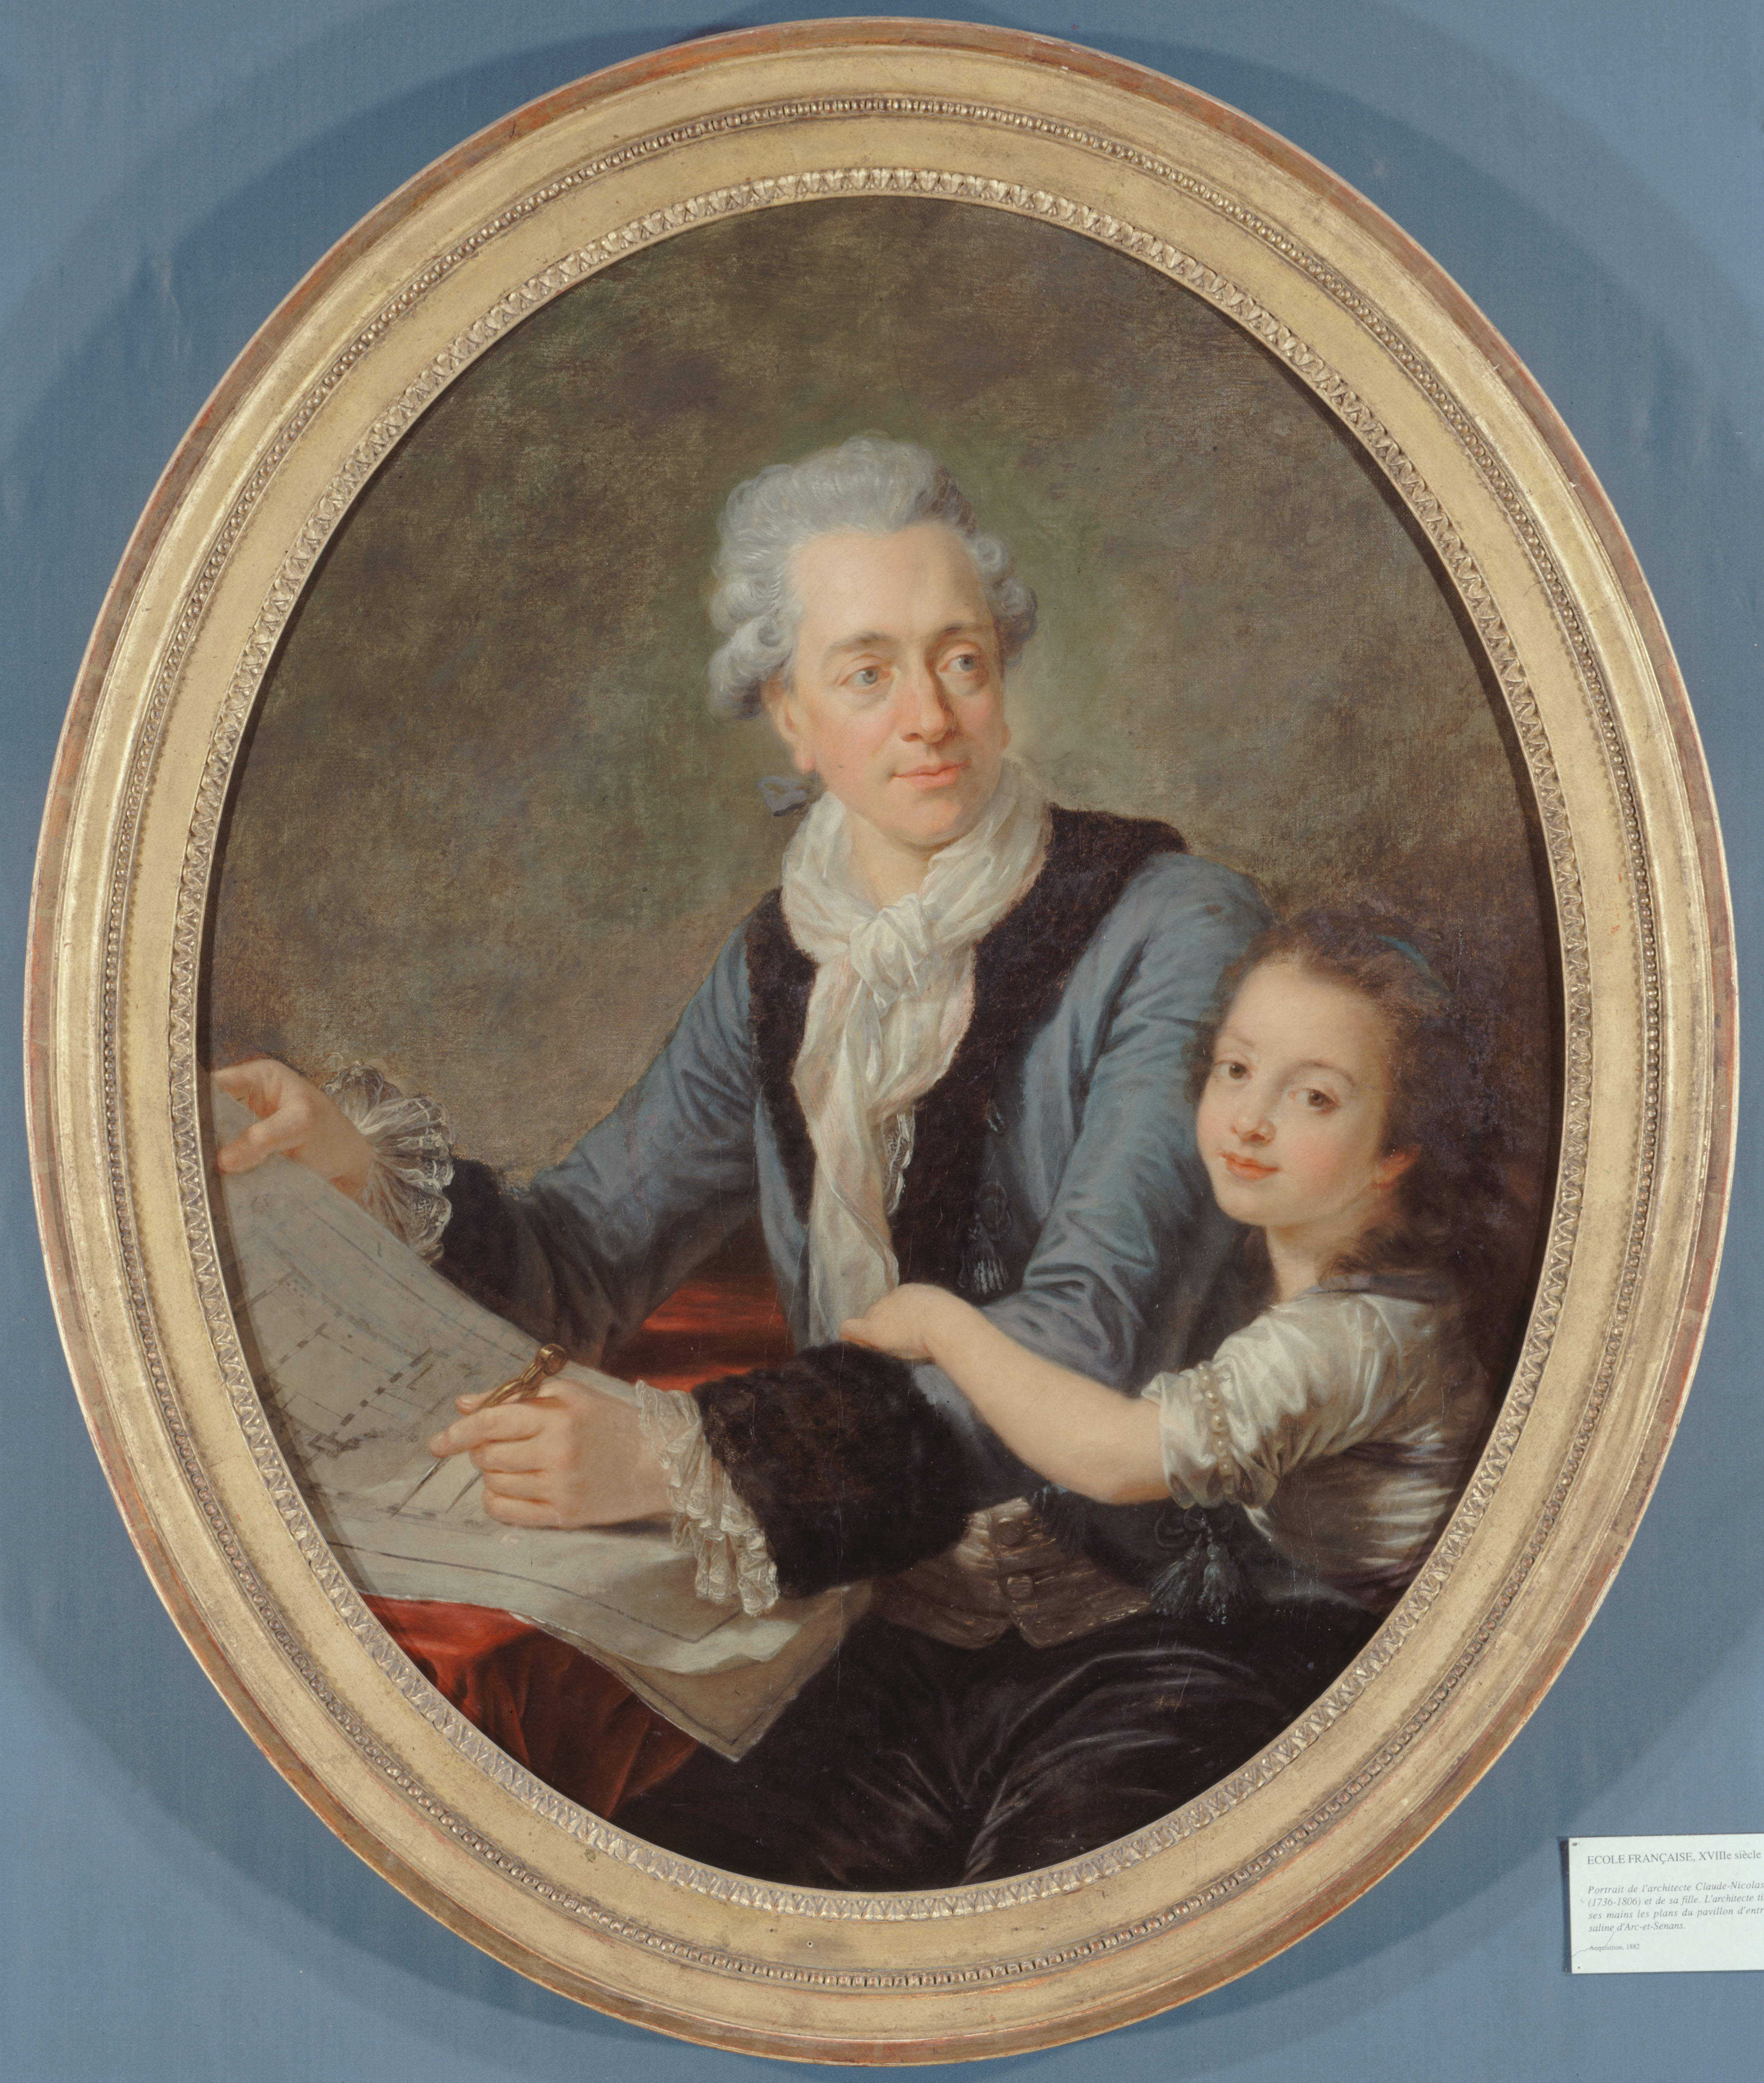 Ledoux and his daughter